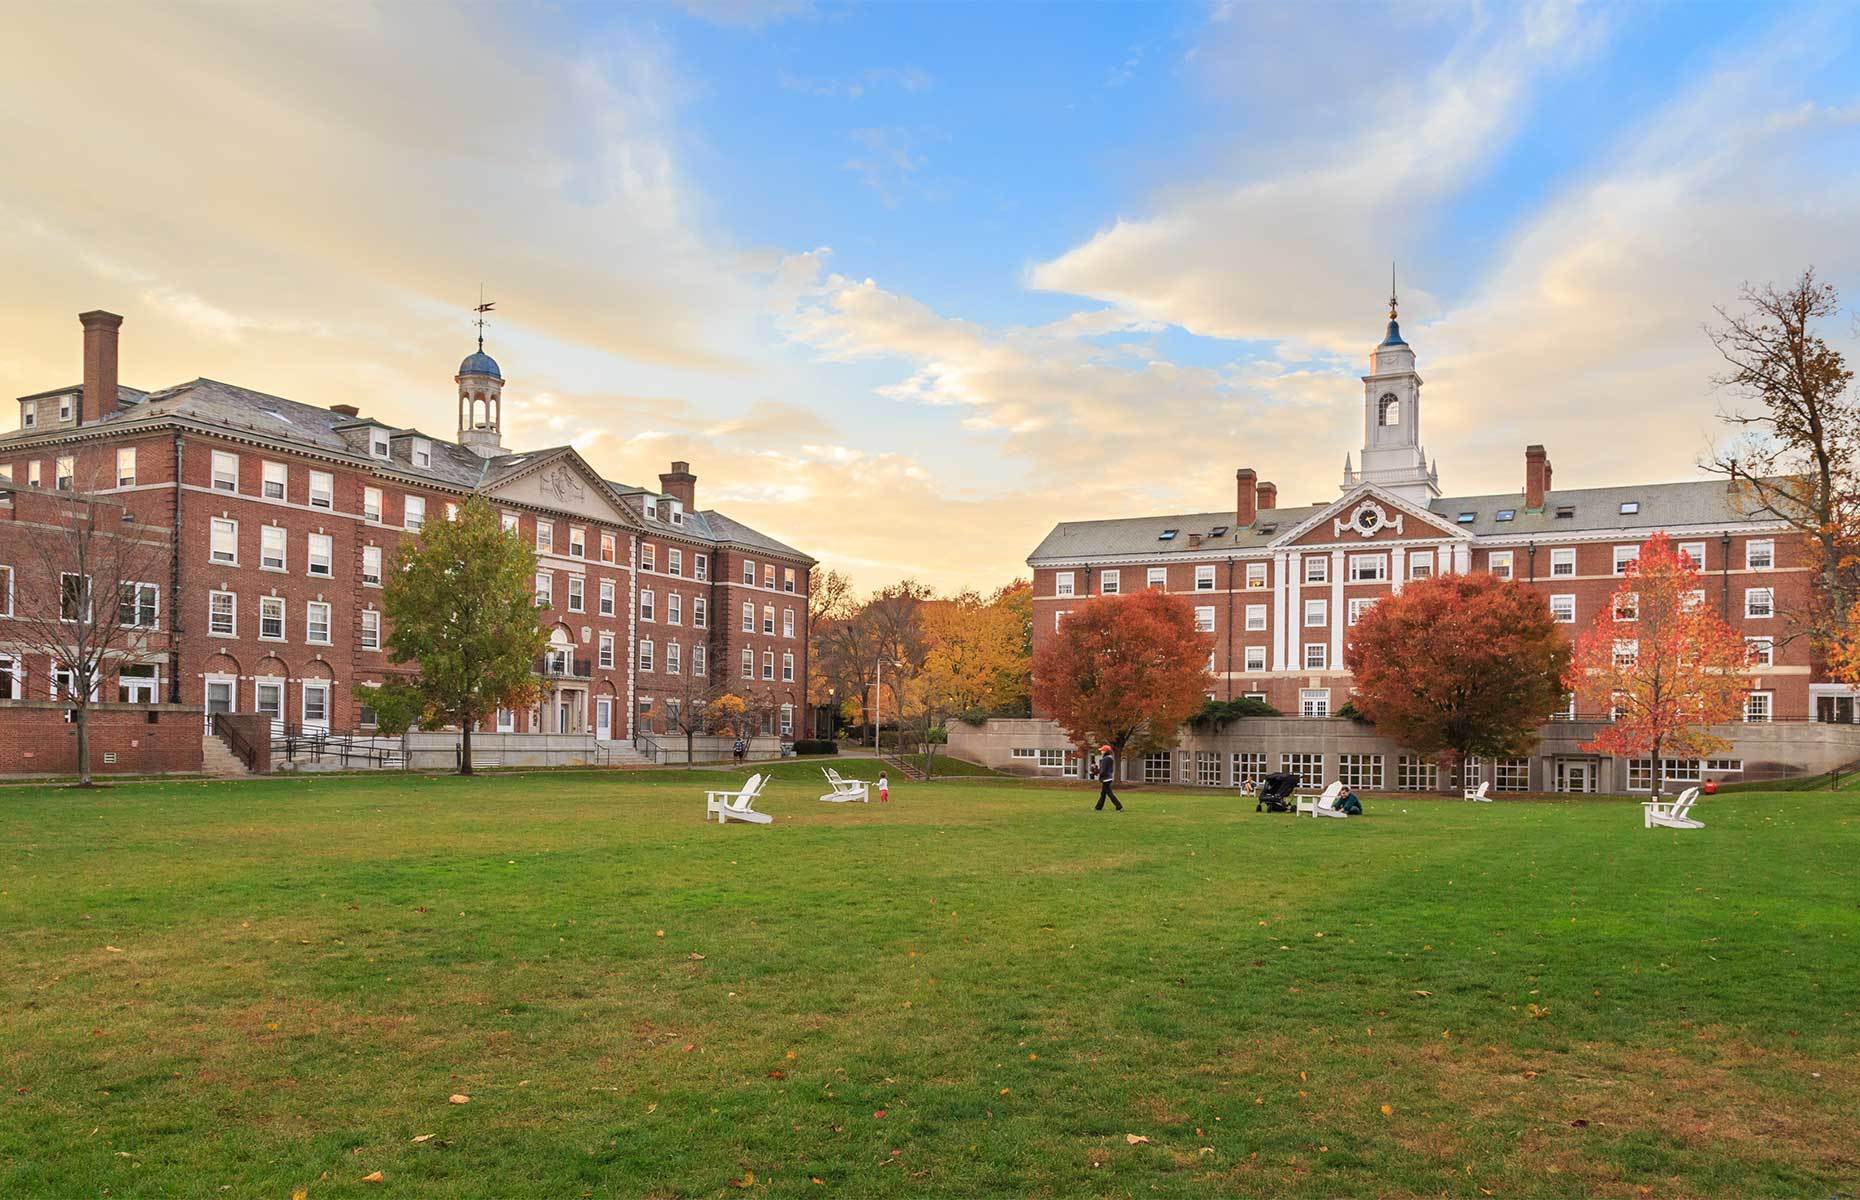 <p class="p1"><span>Enjoy a <a href="https://www.harvard.edu/on-campus/visit-harvard" rel="noreferrer noopener"><span>guided tour of legendary Harvard University or choose a mobile tour via instructions on your smartphone</span></a>. Take in the history while imagining the prestige of studying on this impressive campus.</span></p>